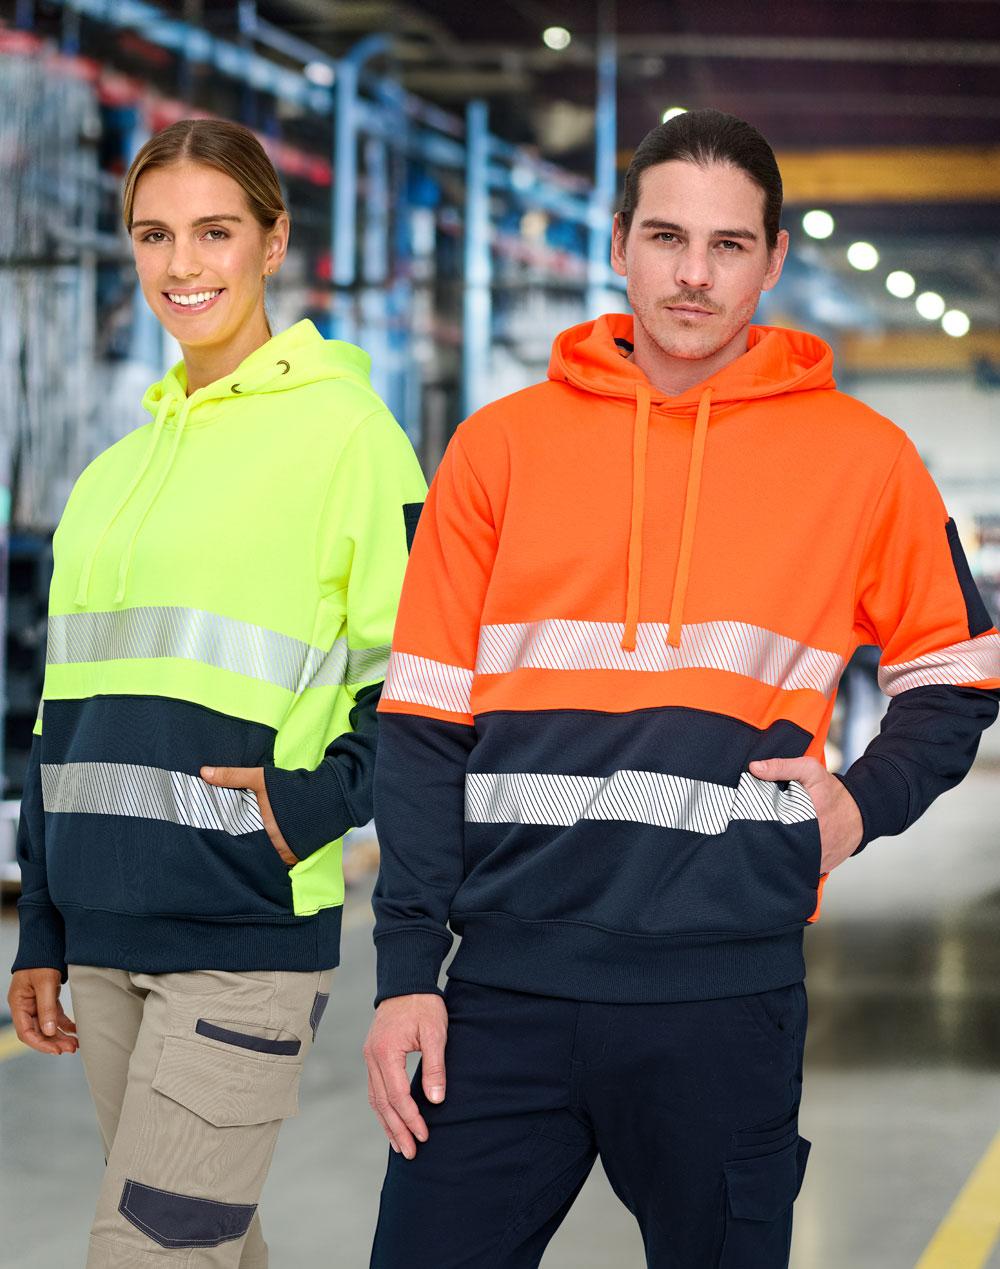 Winning Spirit Hi-Vis Two Tone Safety Hoodies With Segmented Tapes (SW88 )